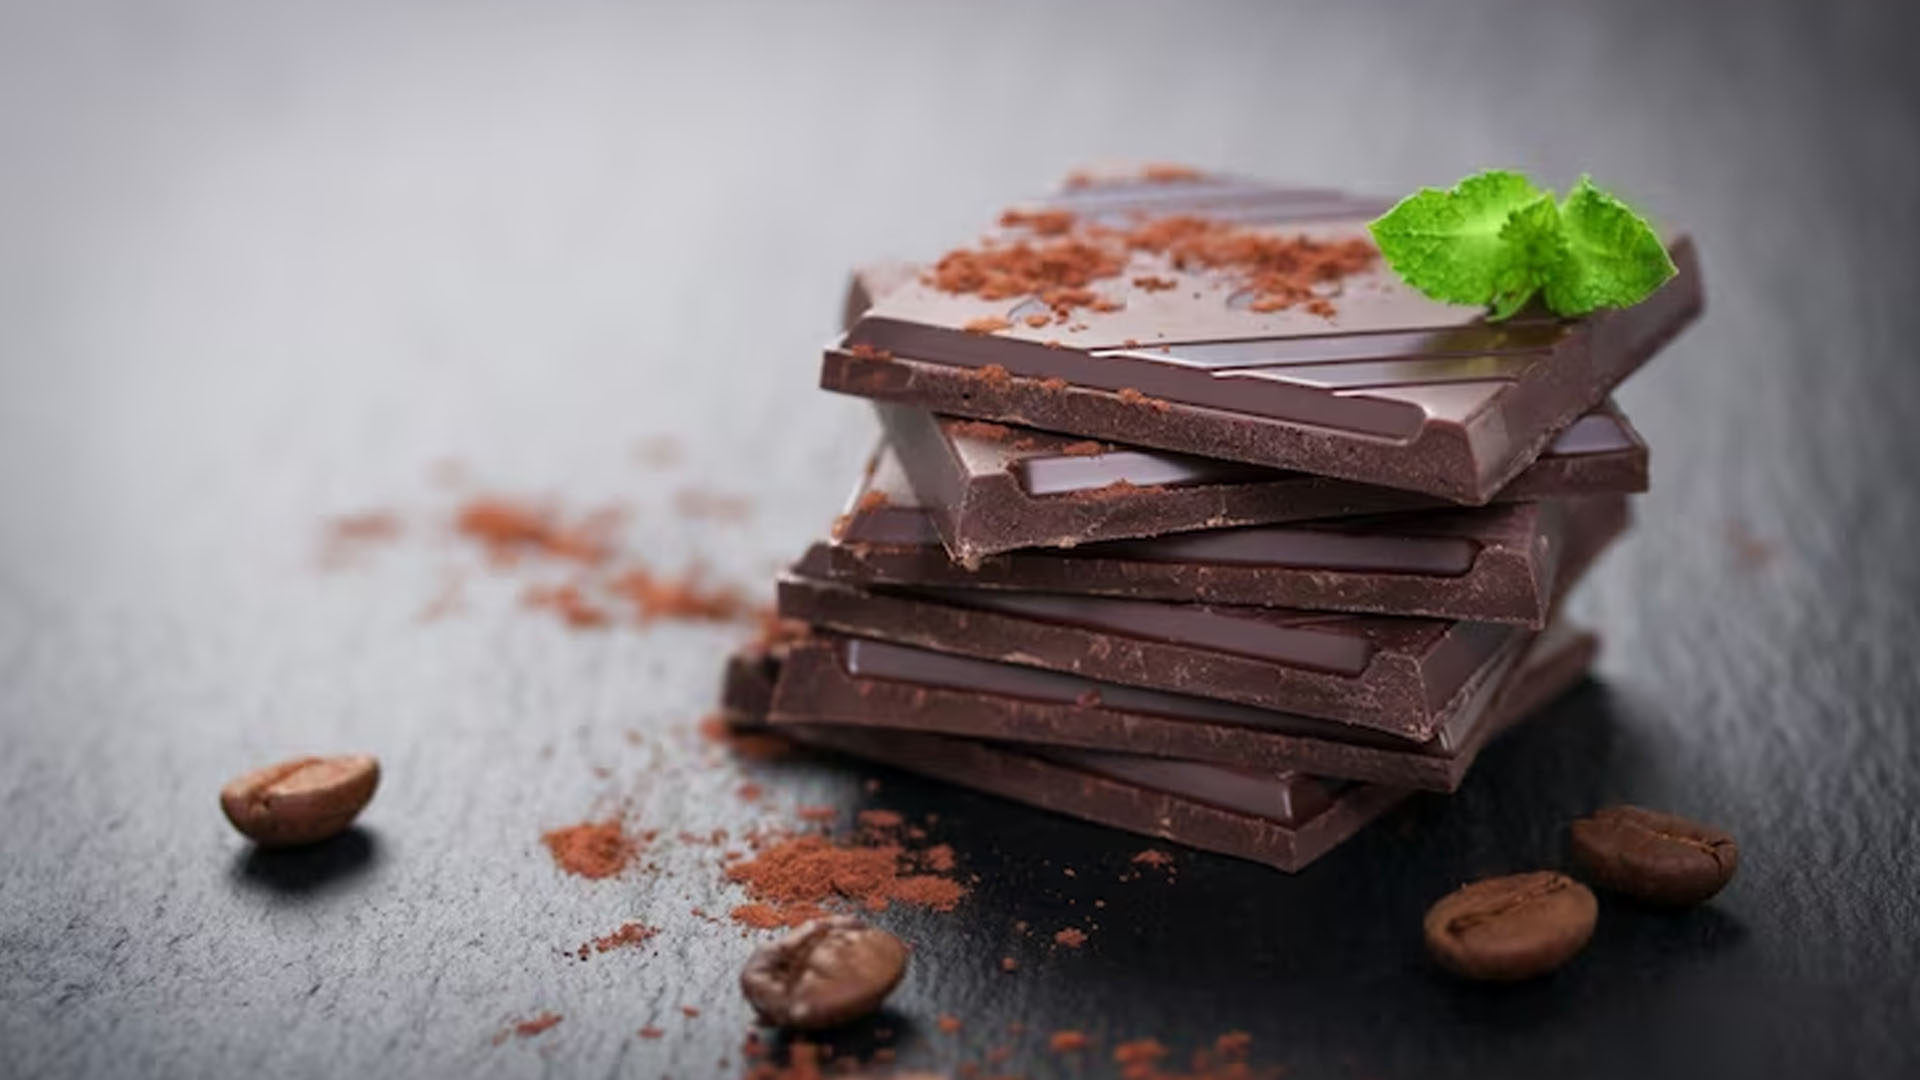 What Are The Health Benefits of Chocolate Mint?